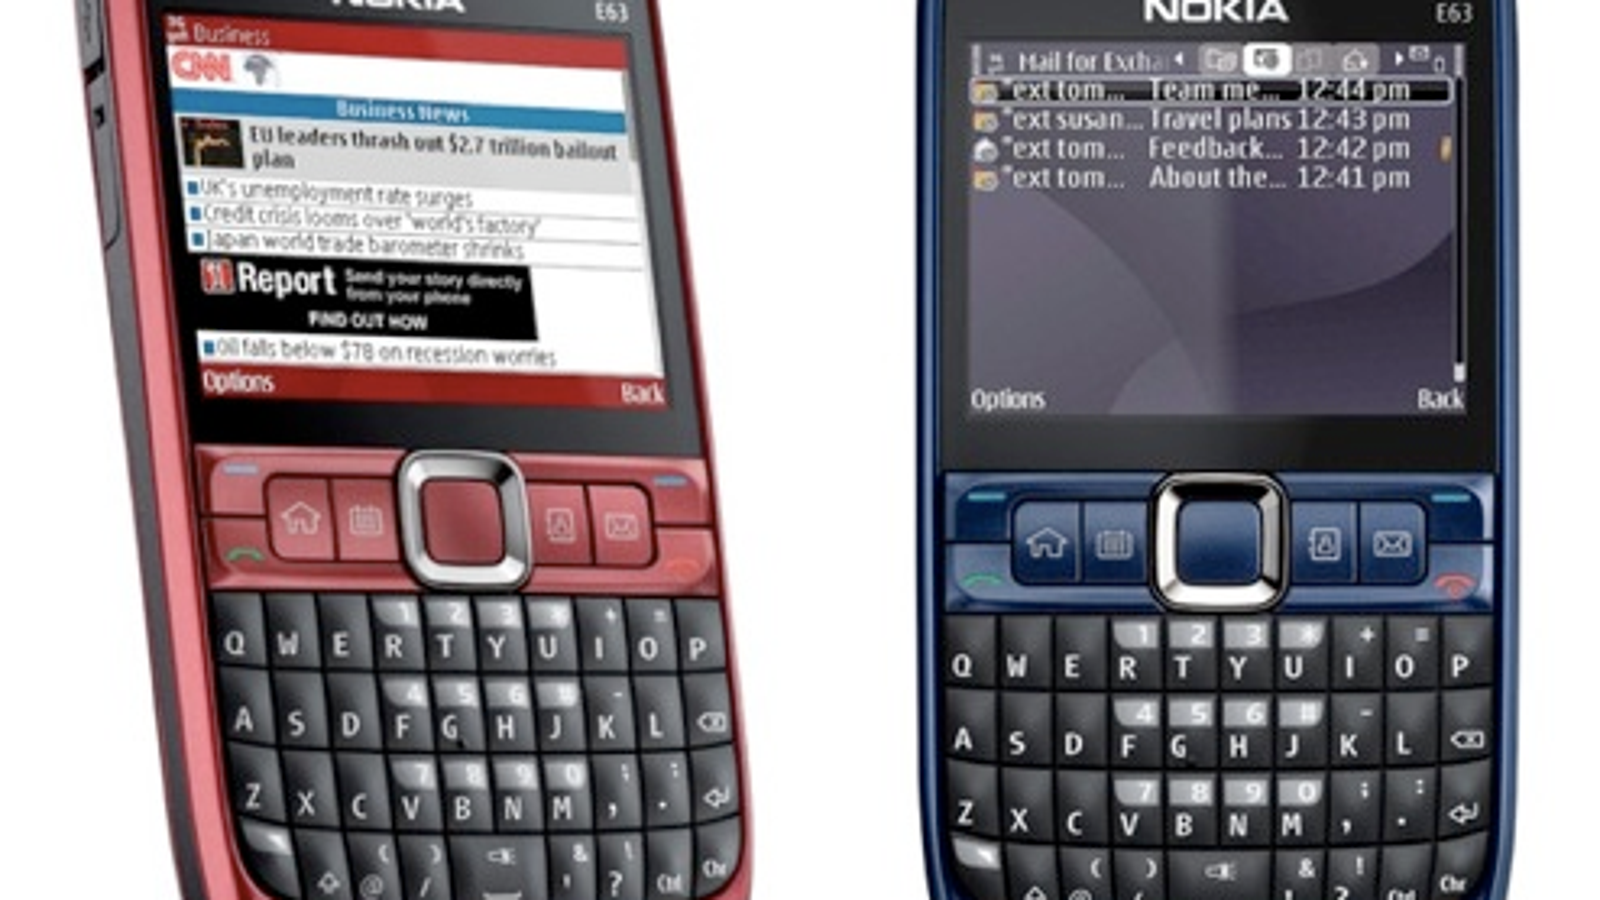 is nokia e63 support whatsapp